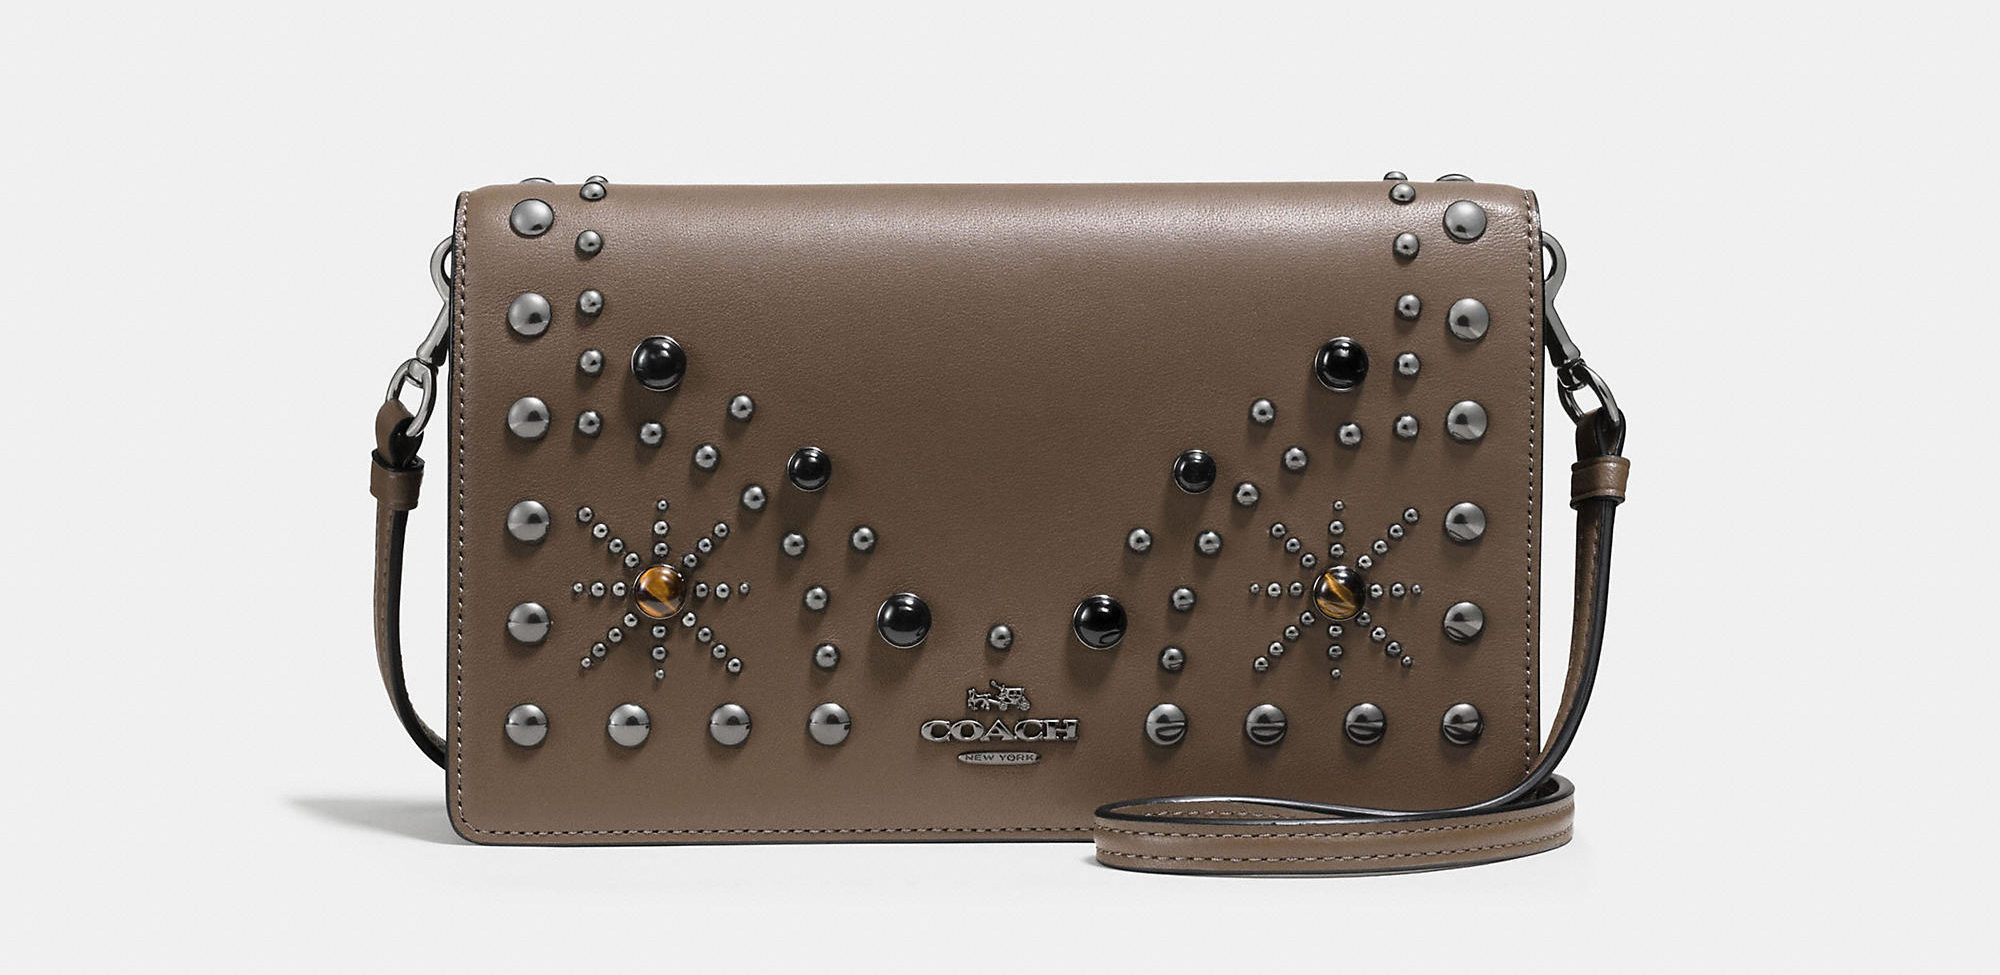 Coach studded bag in brown front view